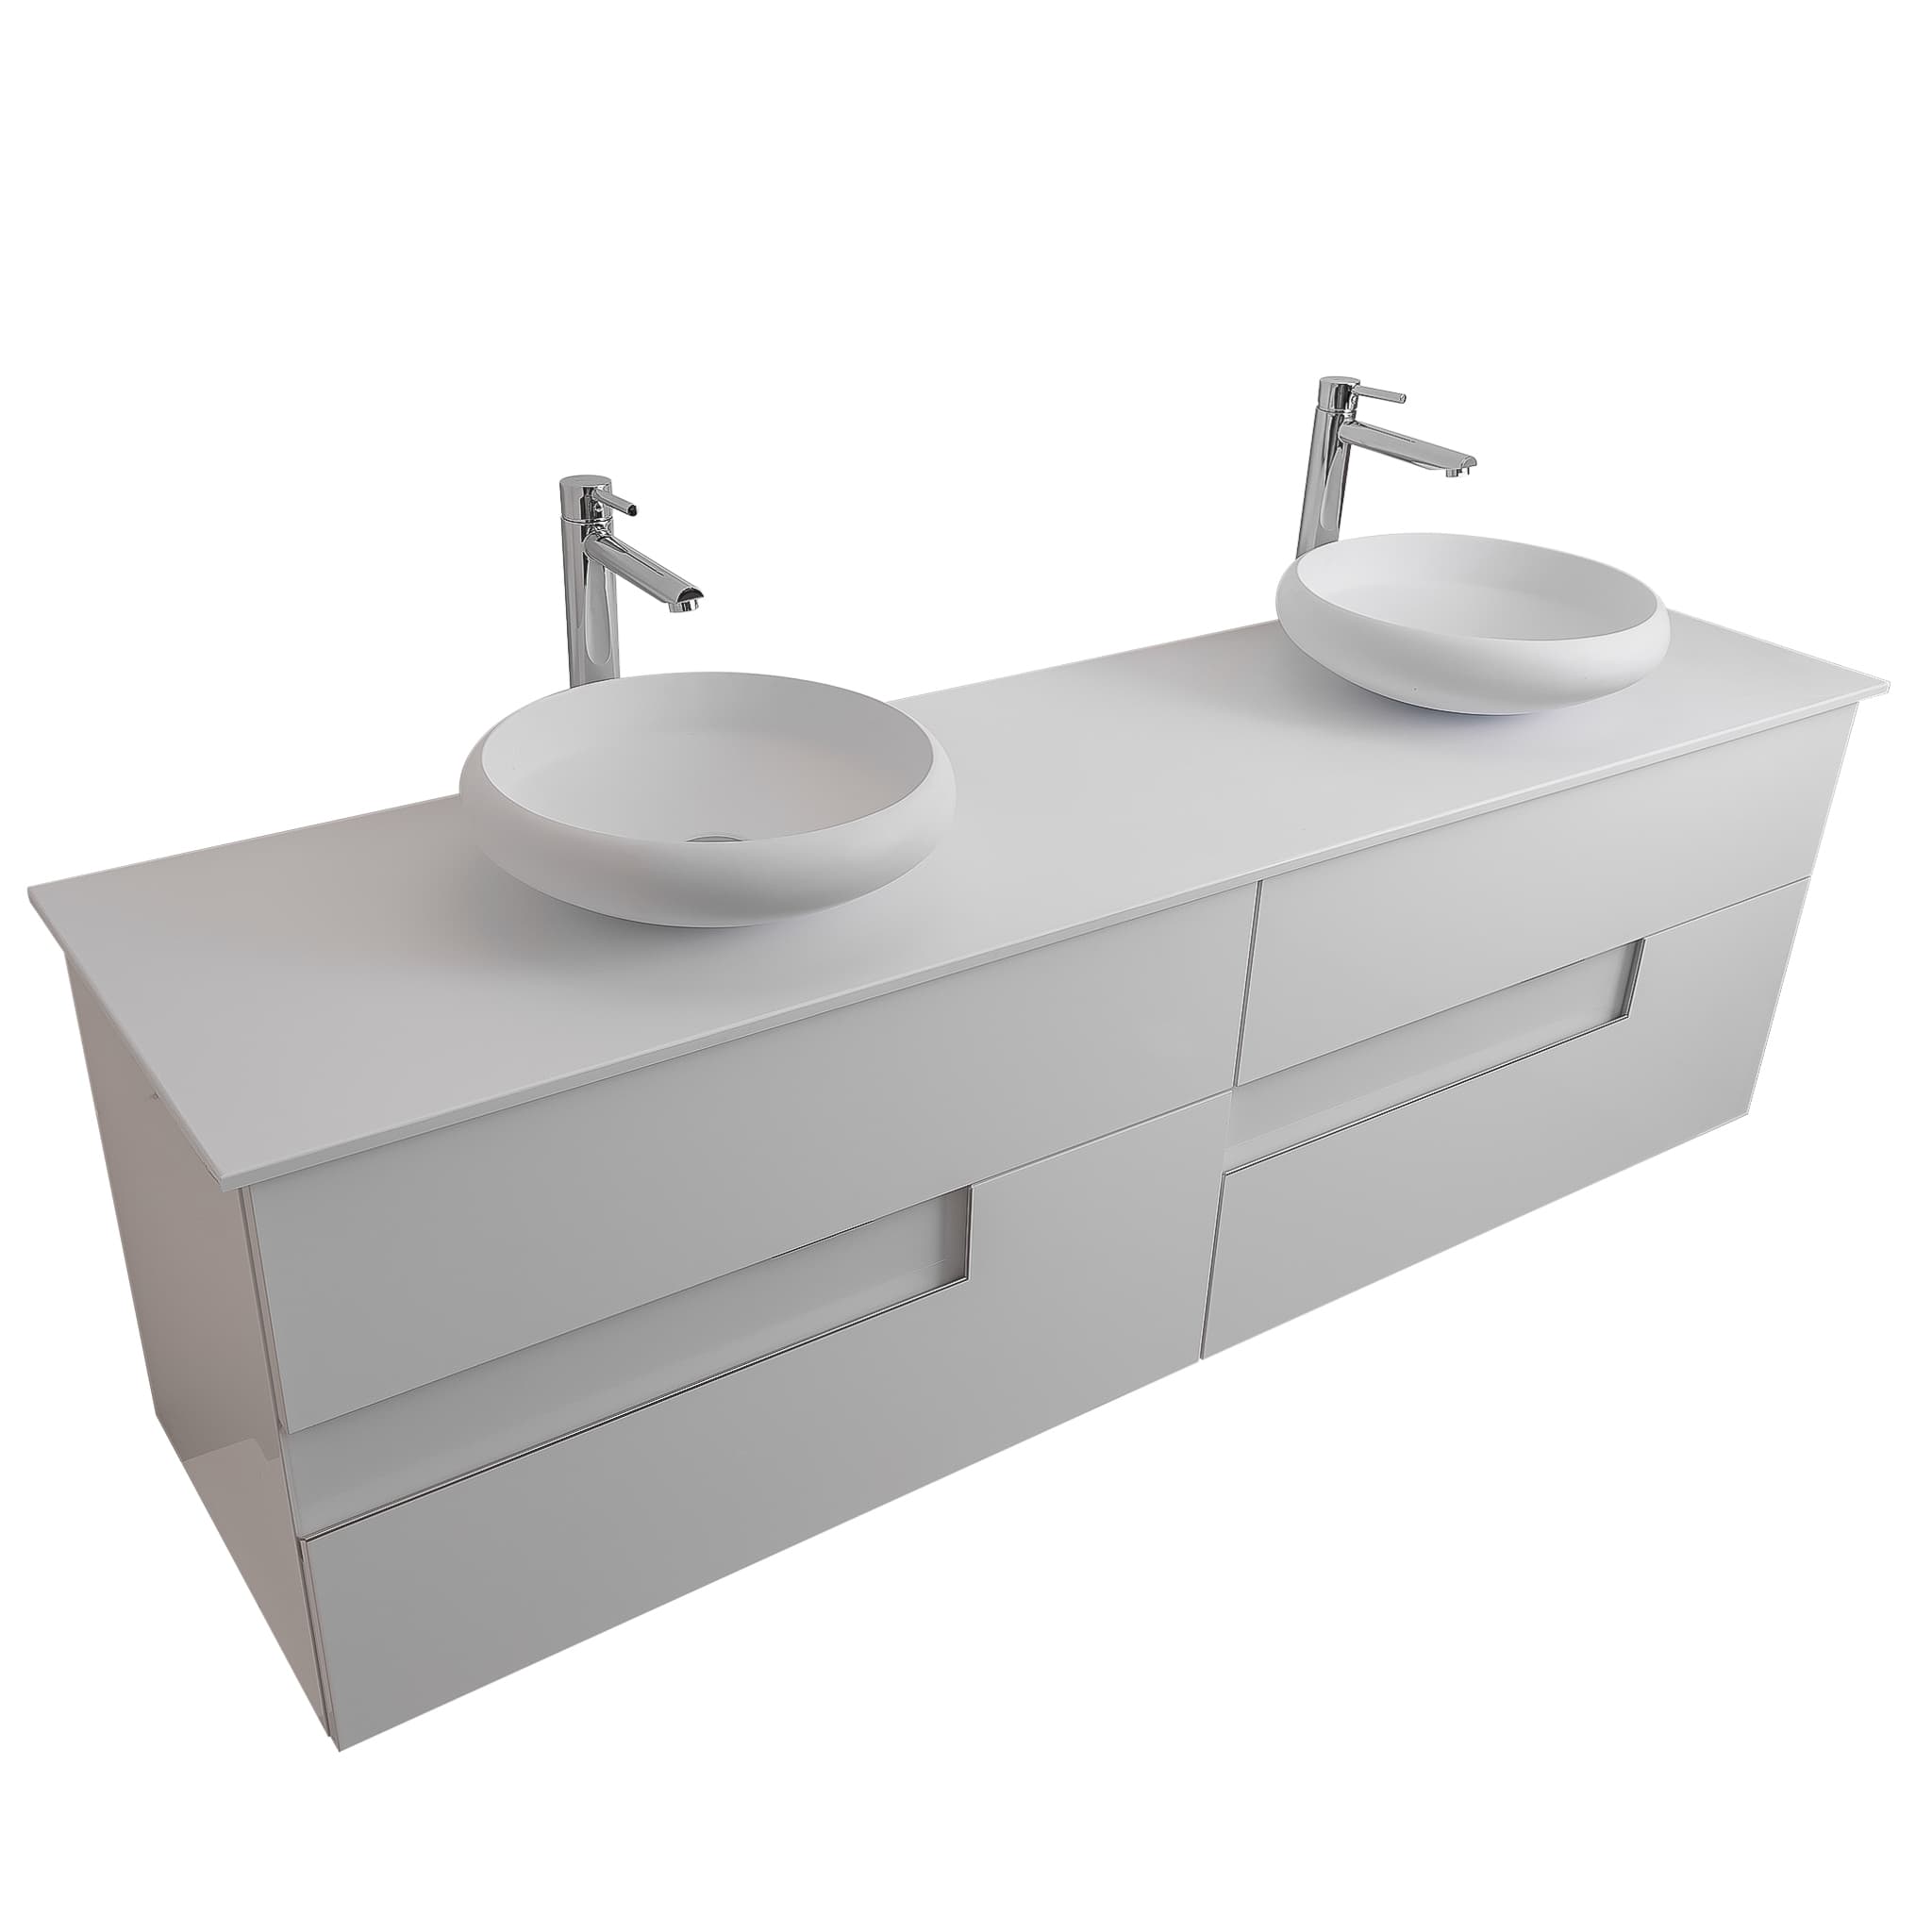 Vision 72 White High Gloss Cabinet, Solid Surface Flat White Counter And Two Round Solid Surface White Basin 1153, Wall Mounted Modern Vanity Set